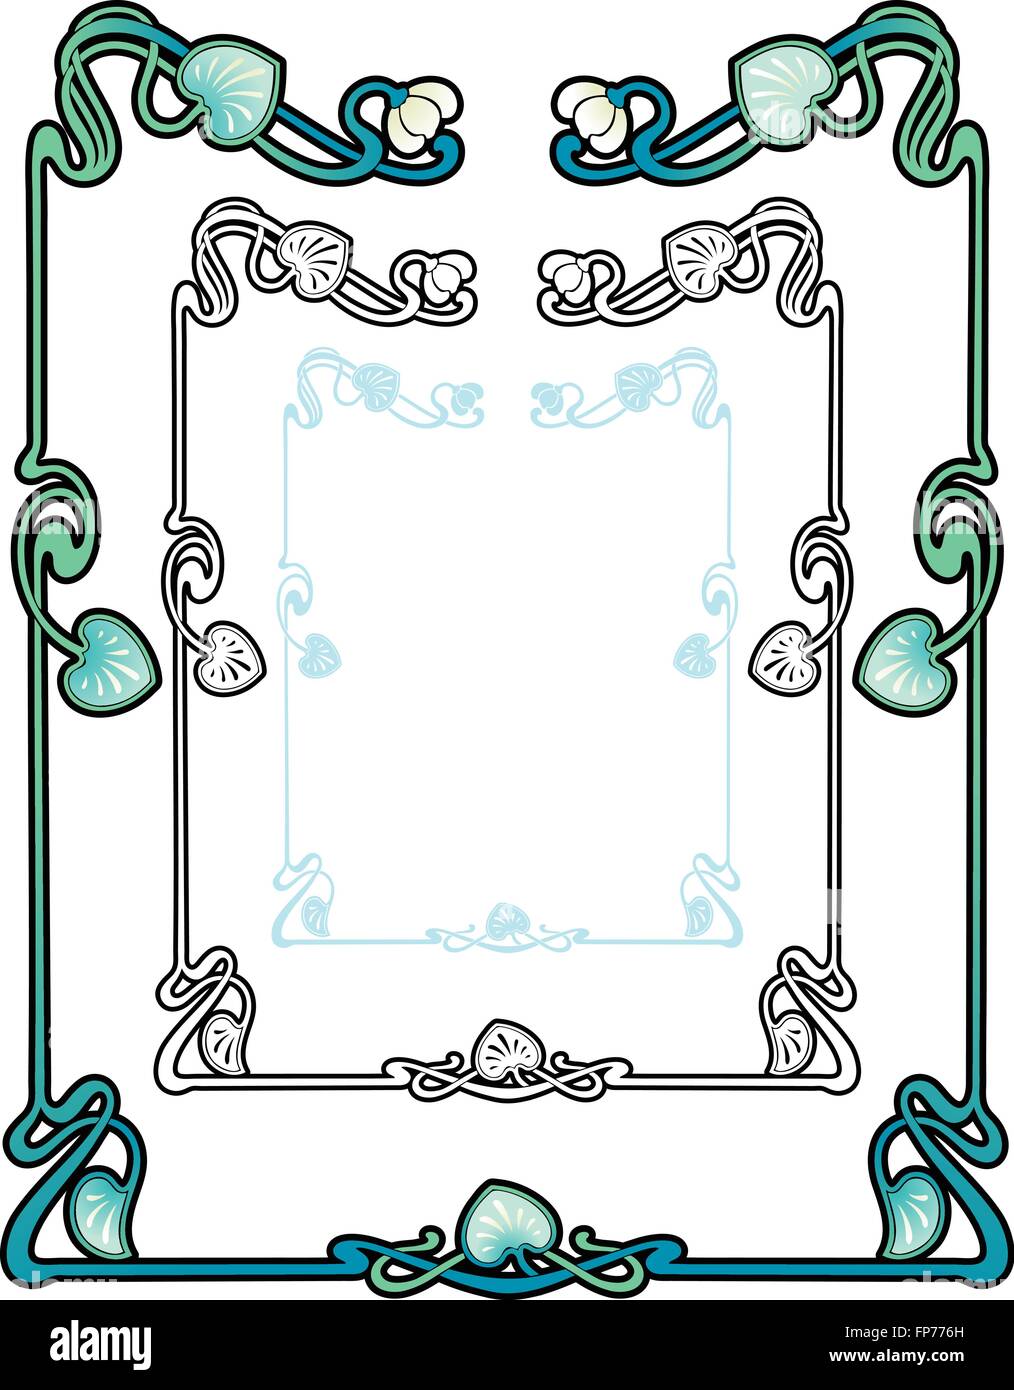 art nouveau style border of water nymph lilies with vines and leaves Stock Image